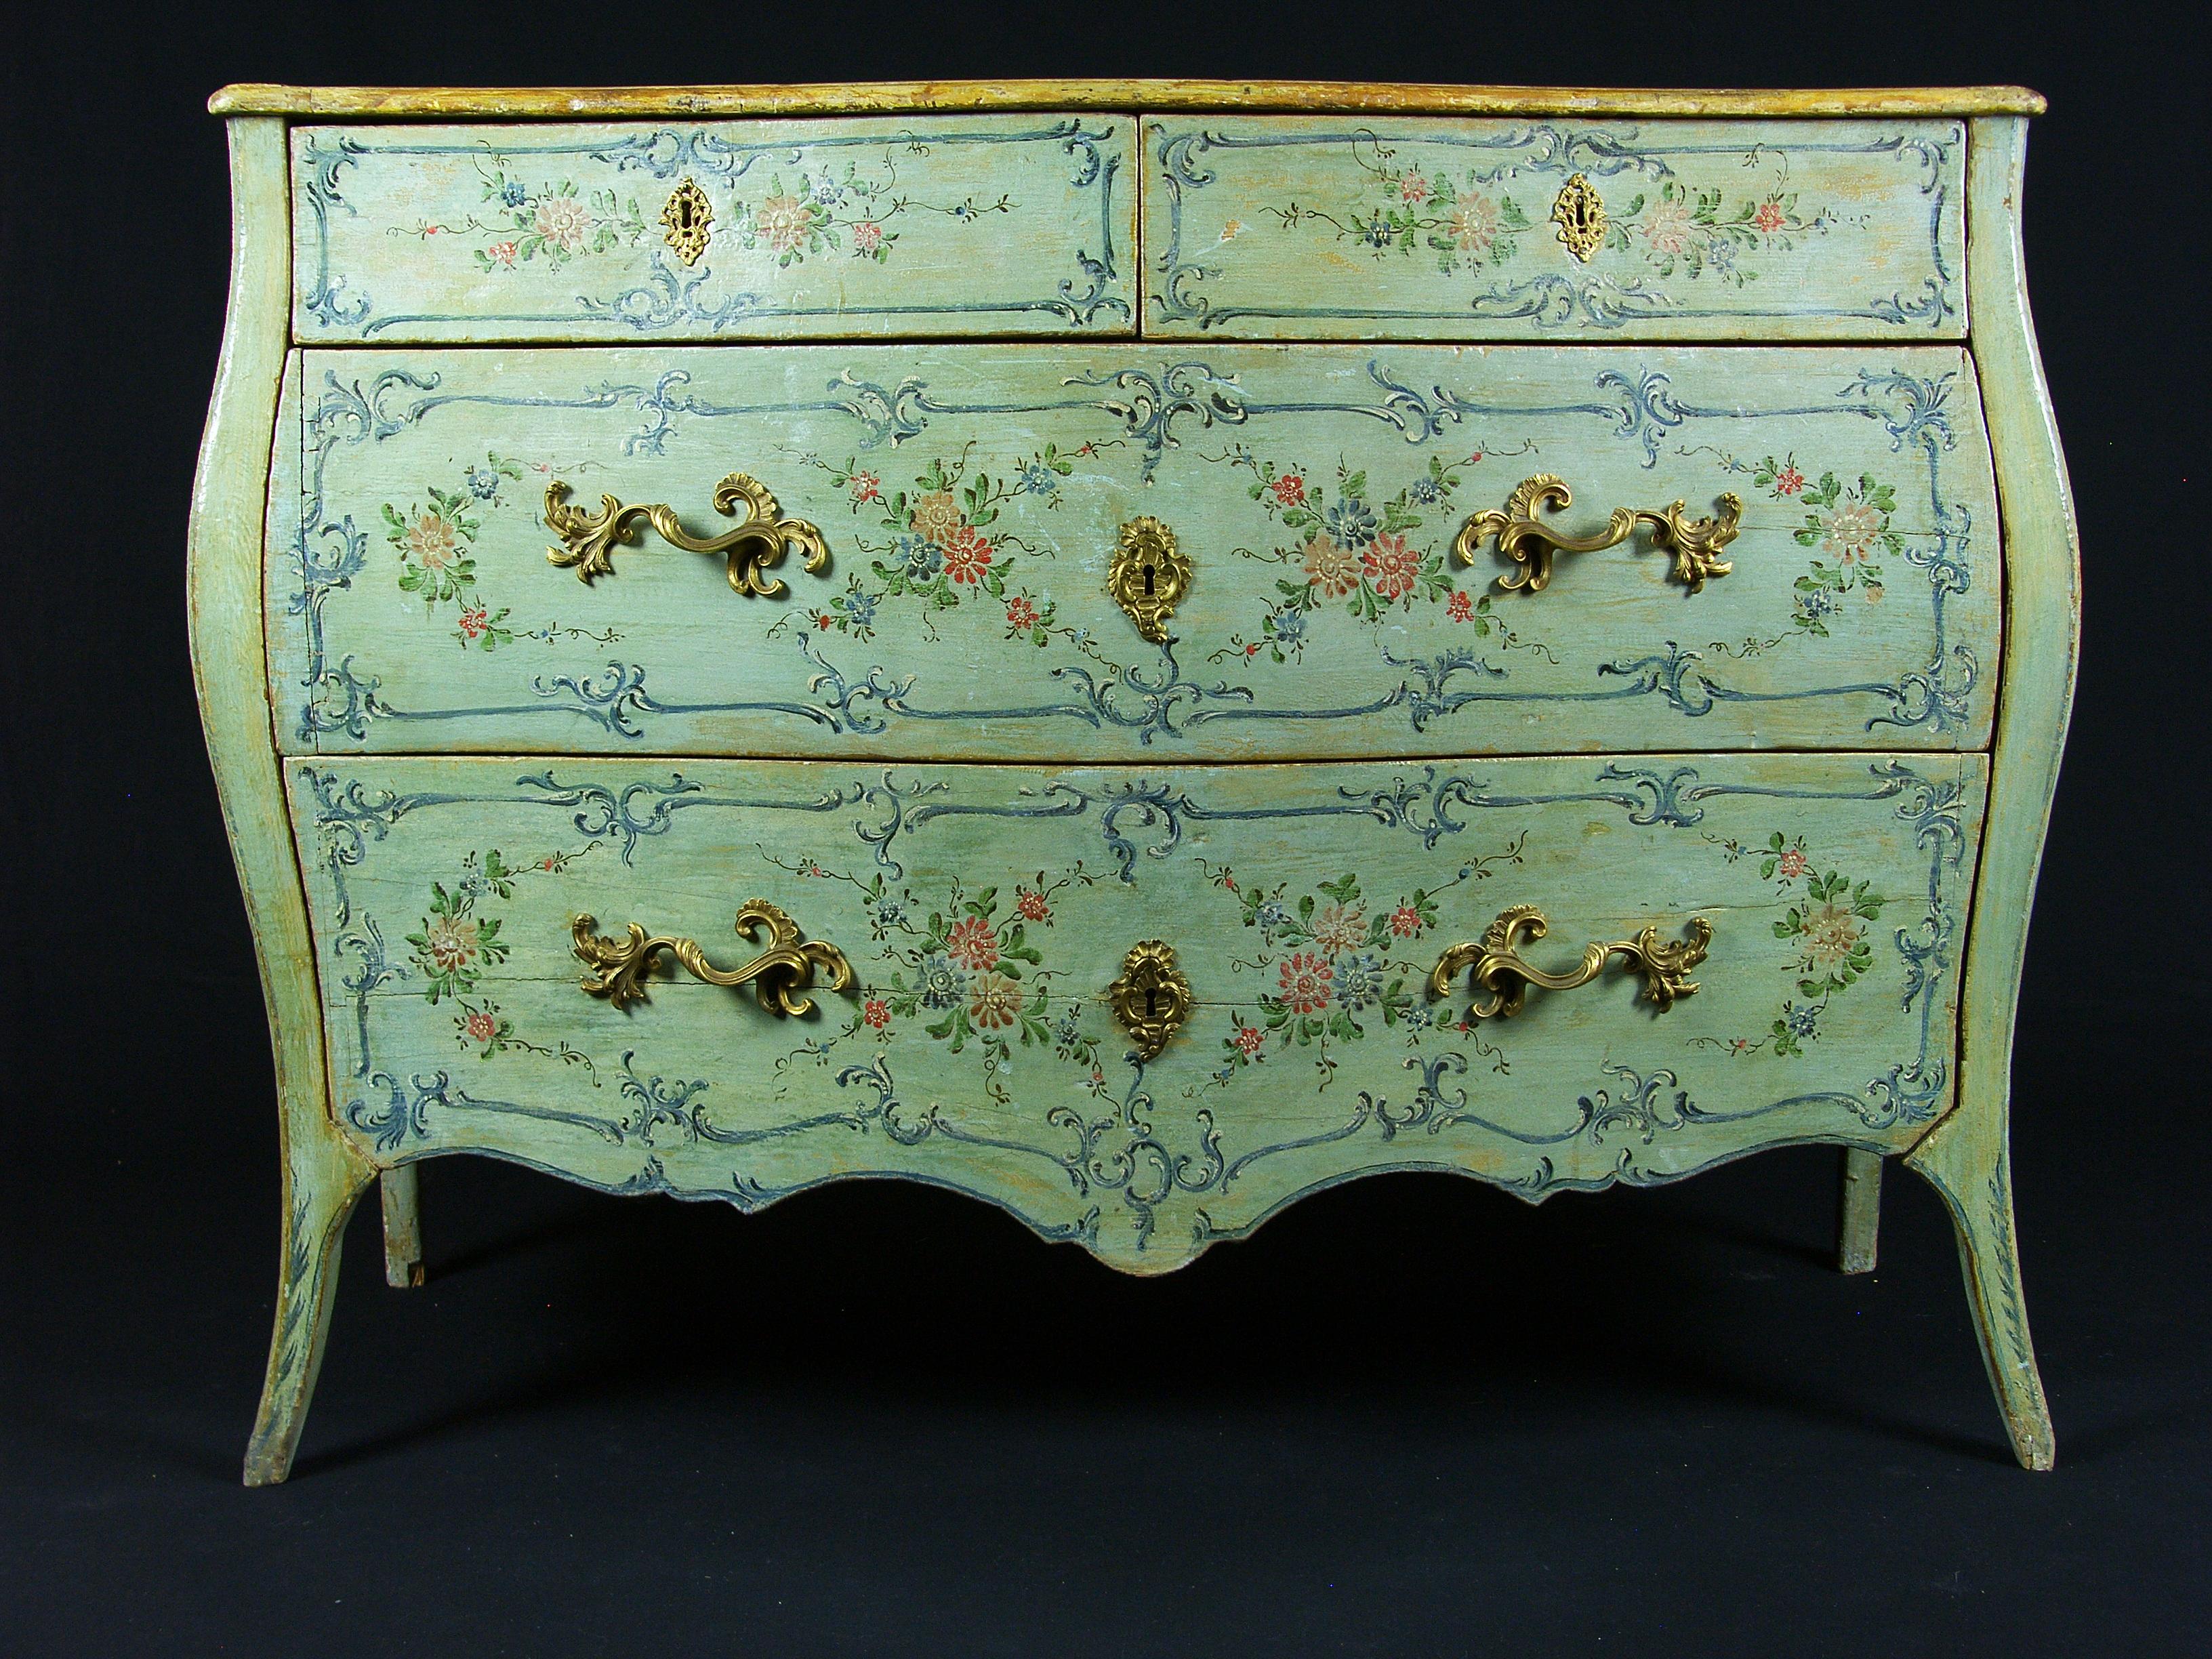 18th Century Italian Polychrome Lacquered Wooden Dresser with Floral Decorations 12